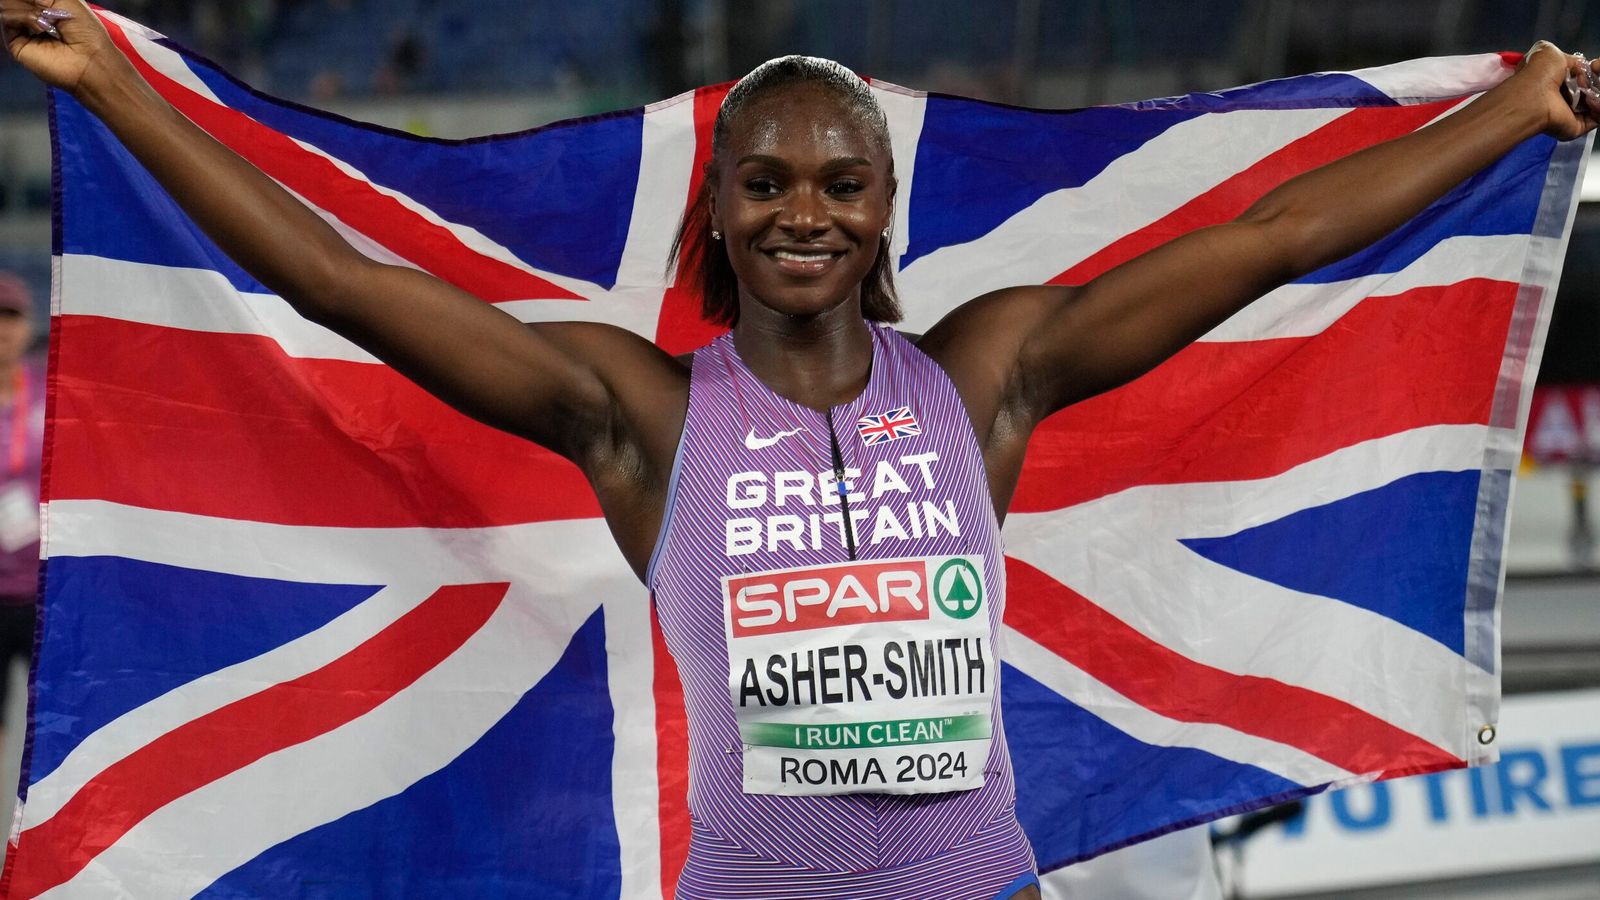 Dina Asher-Smith takes gold in European Championships 100m